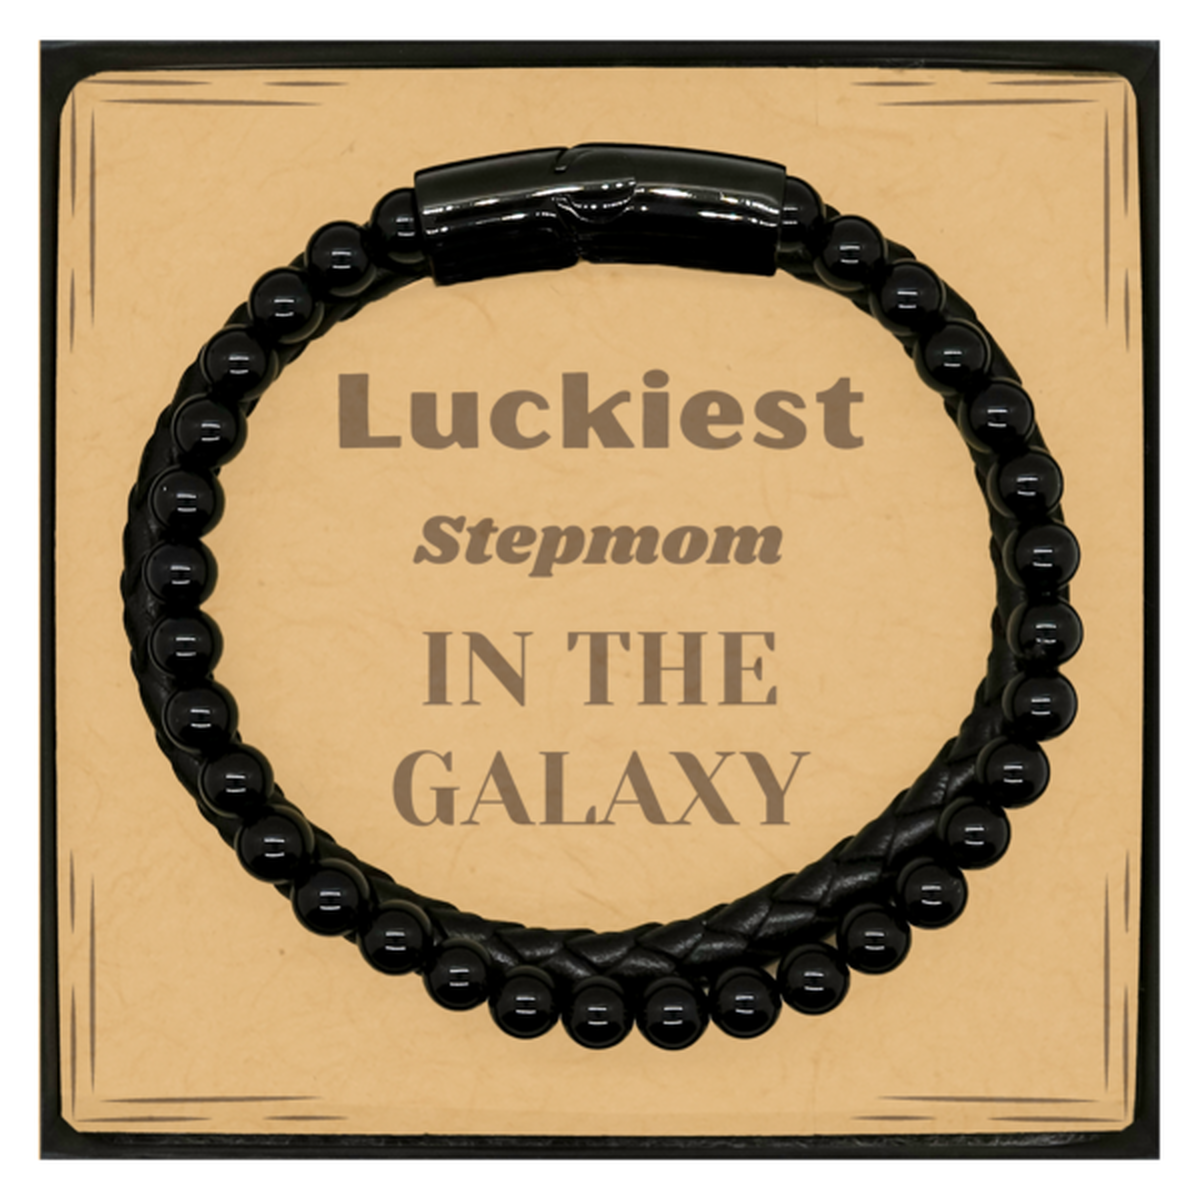 Luckiest Stepmom in the Galaxy, To My Stepmom Message Card Gifts, Christmas Stepmom Stone Leather Bracelets Gifts, X-mas Birthday Unique Gifts For Stepmom Men Women